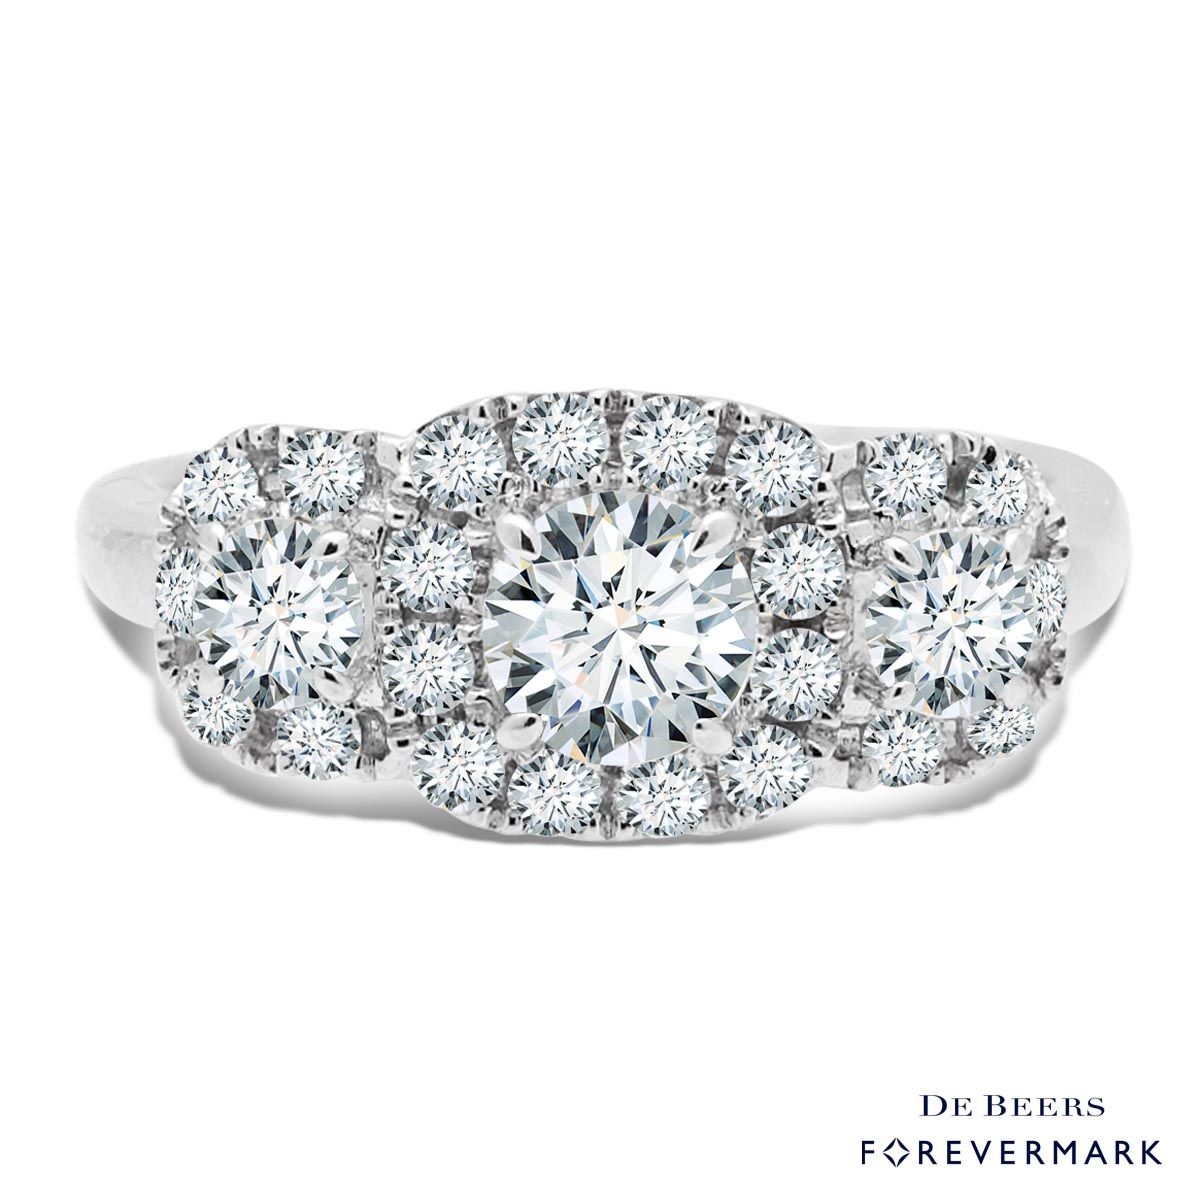 De Beers Forevermark Three Stone Diamond Halo Engagement Ring in 18kt White Gold (7/8ct tw)